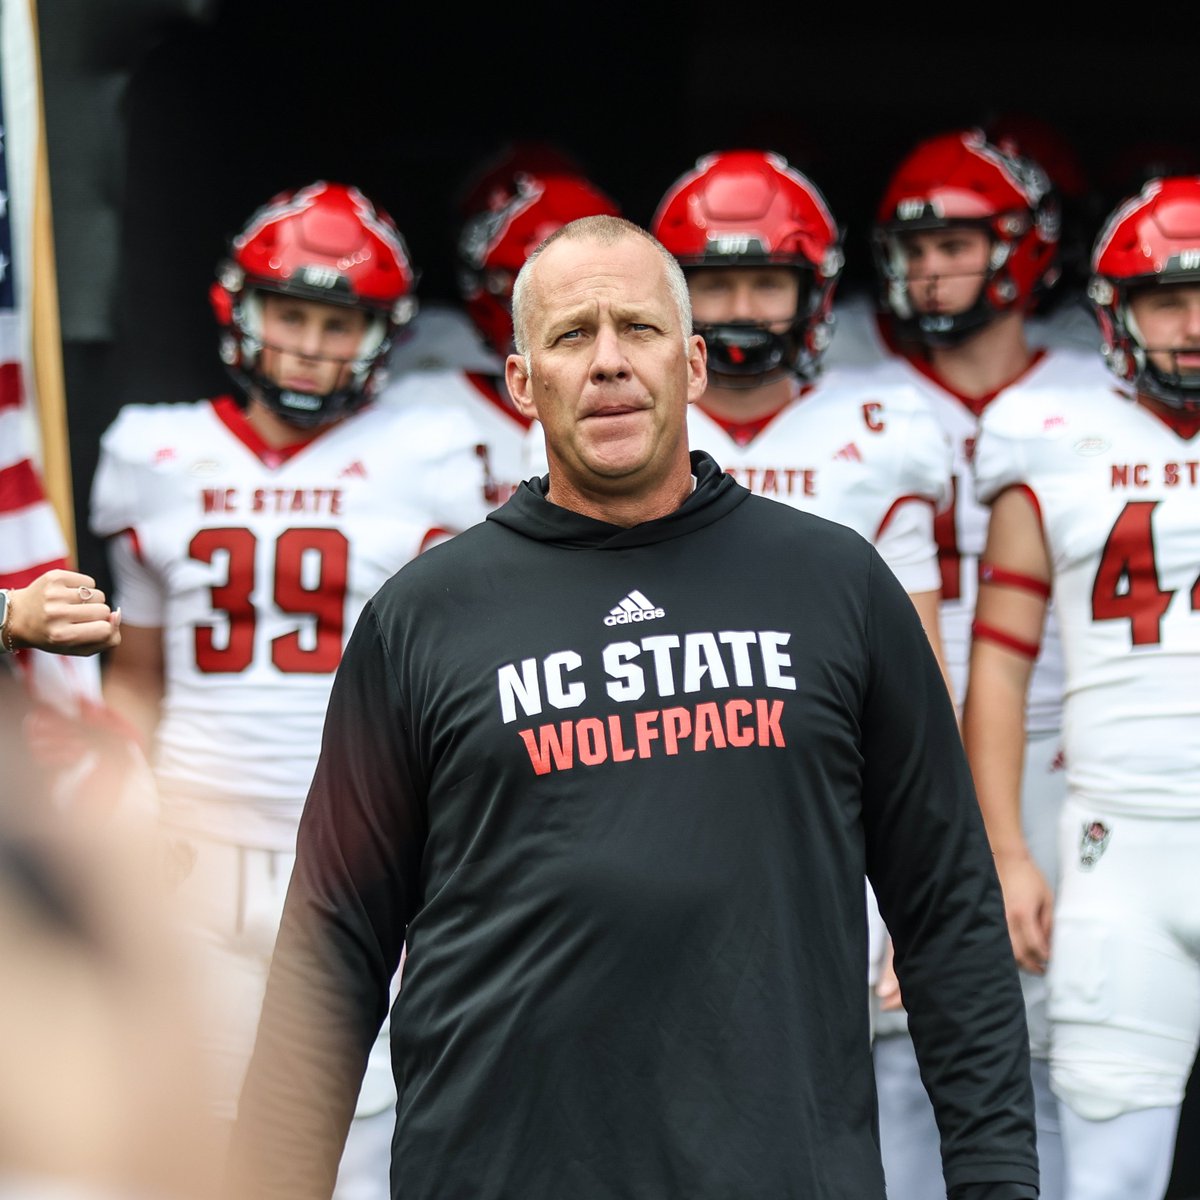 'The consistency Doeren has established at NC State - where he spent most of his time in a division w/ Clemson & FSU - is one of the most impressive things any coach in the country has done.' -- @TomFornelli CBS Sports ranks Dave Doeren as Top 20 coach: 247sports.com/college/north-…